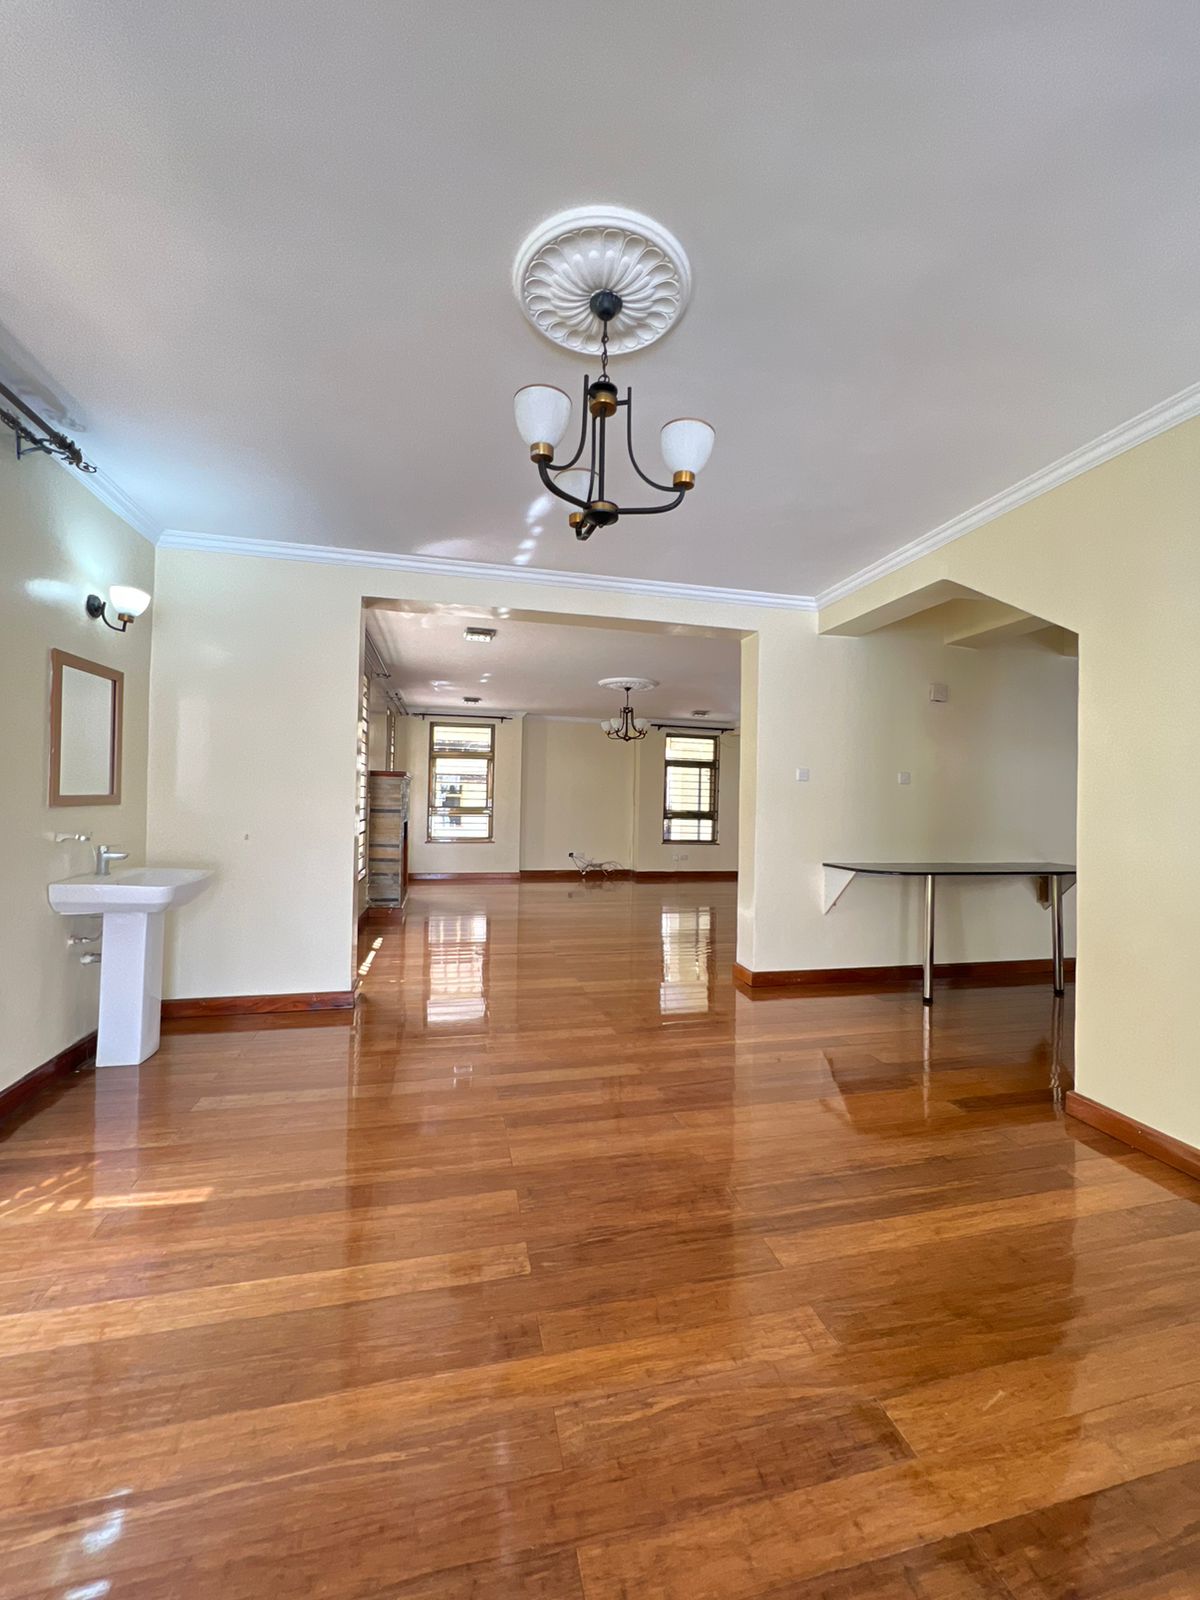 Spacious modern 6 bedroom townhouse to let in Lavington. Backup generator. Gated community. Rent per month 250K Musilli Homes